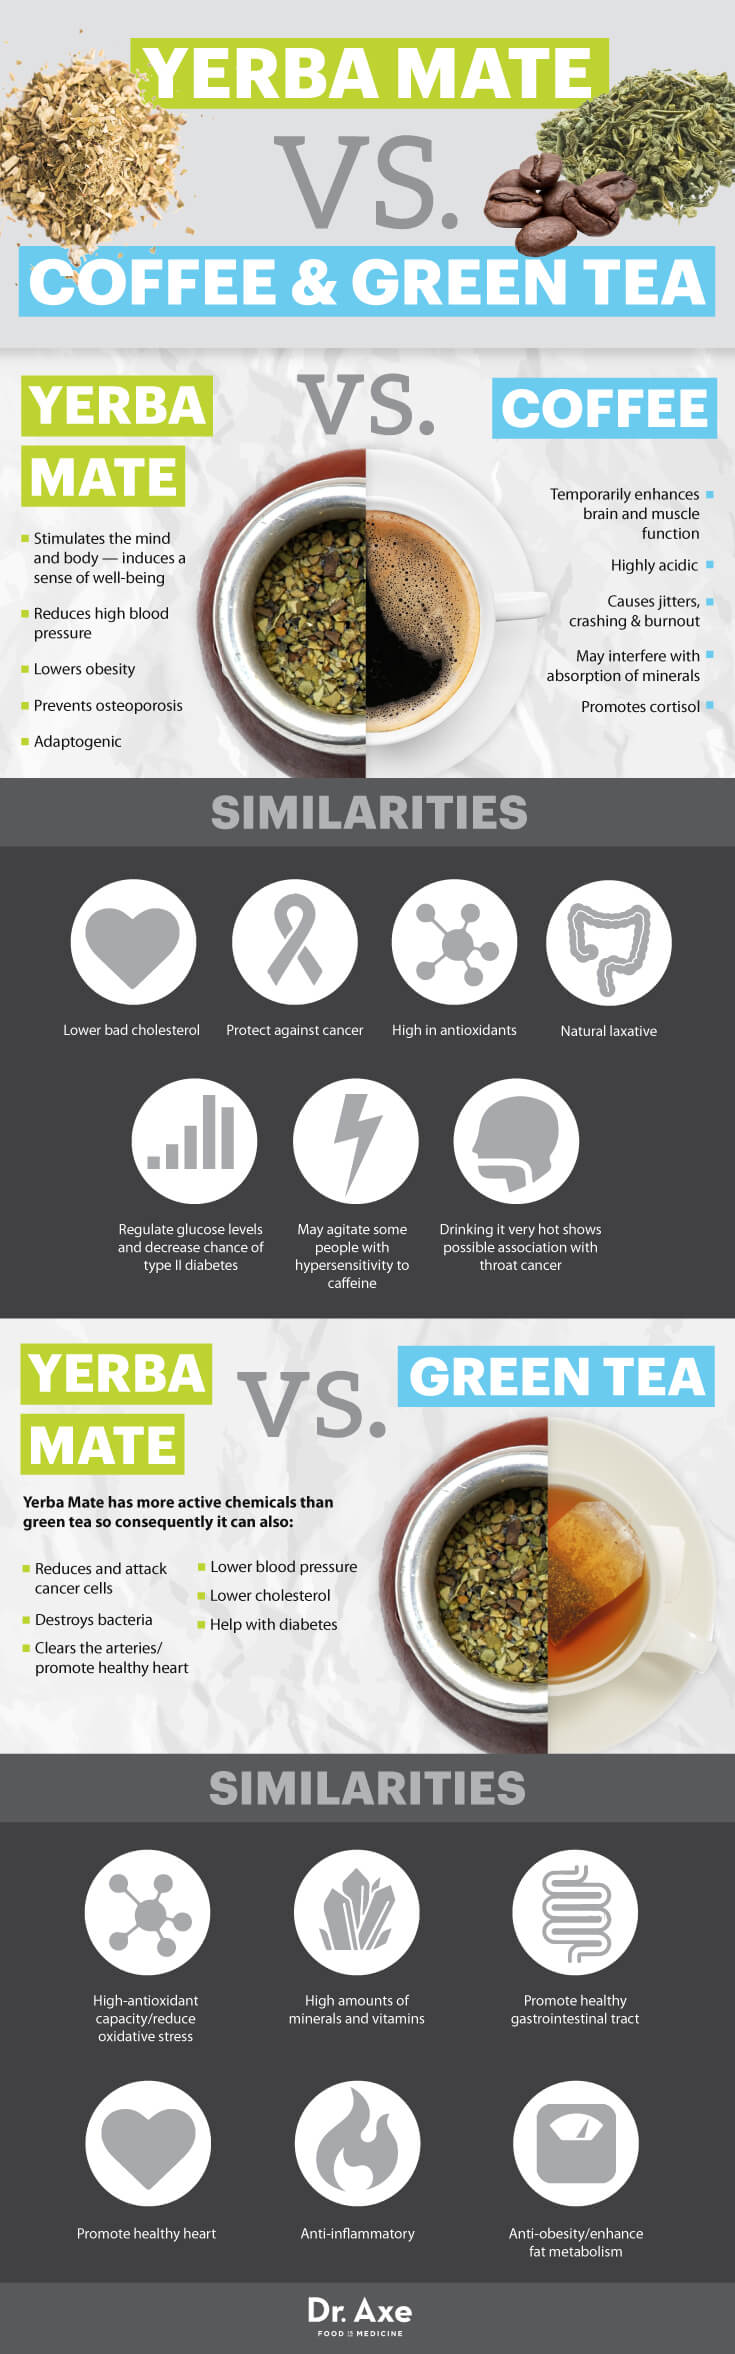 Yerba Mate Benefits, Including Fighting Cancer + How to